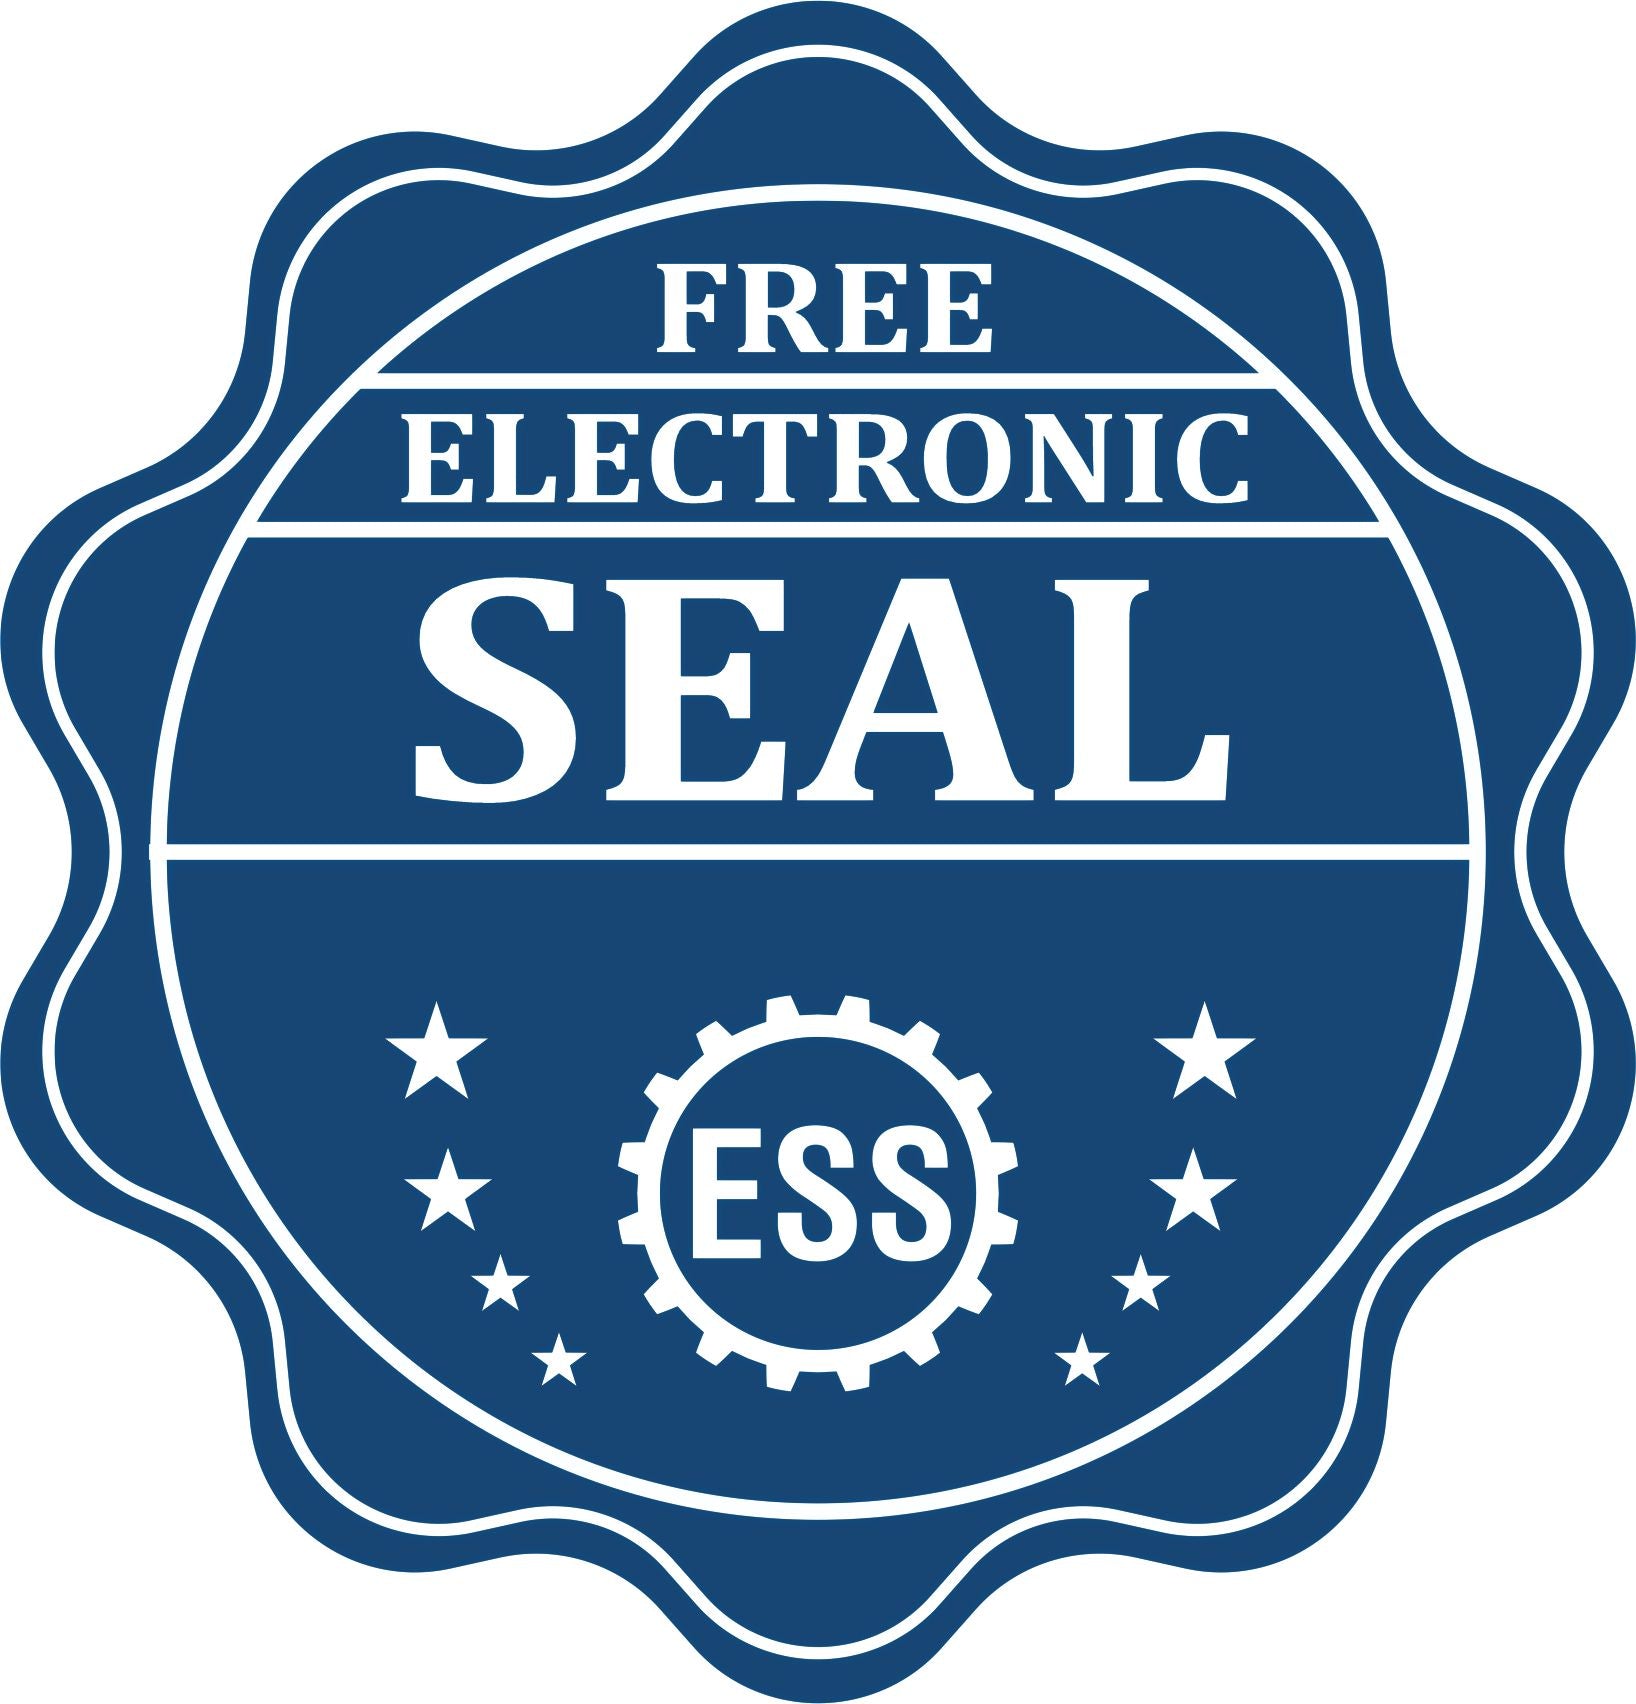 A badge showing a free electronic seal for the Premium MaxLight Pre-Inked California Engineering Stamp with stars and the ESS gear on the emblem.